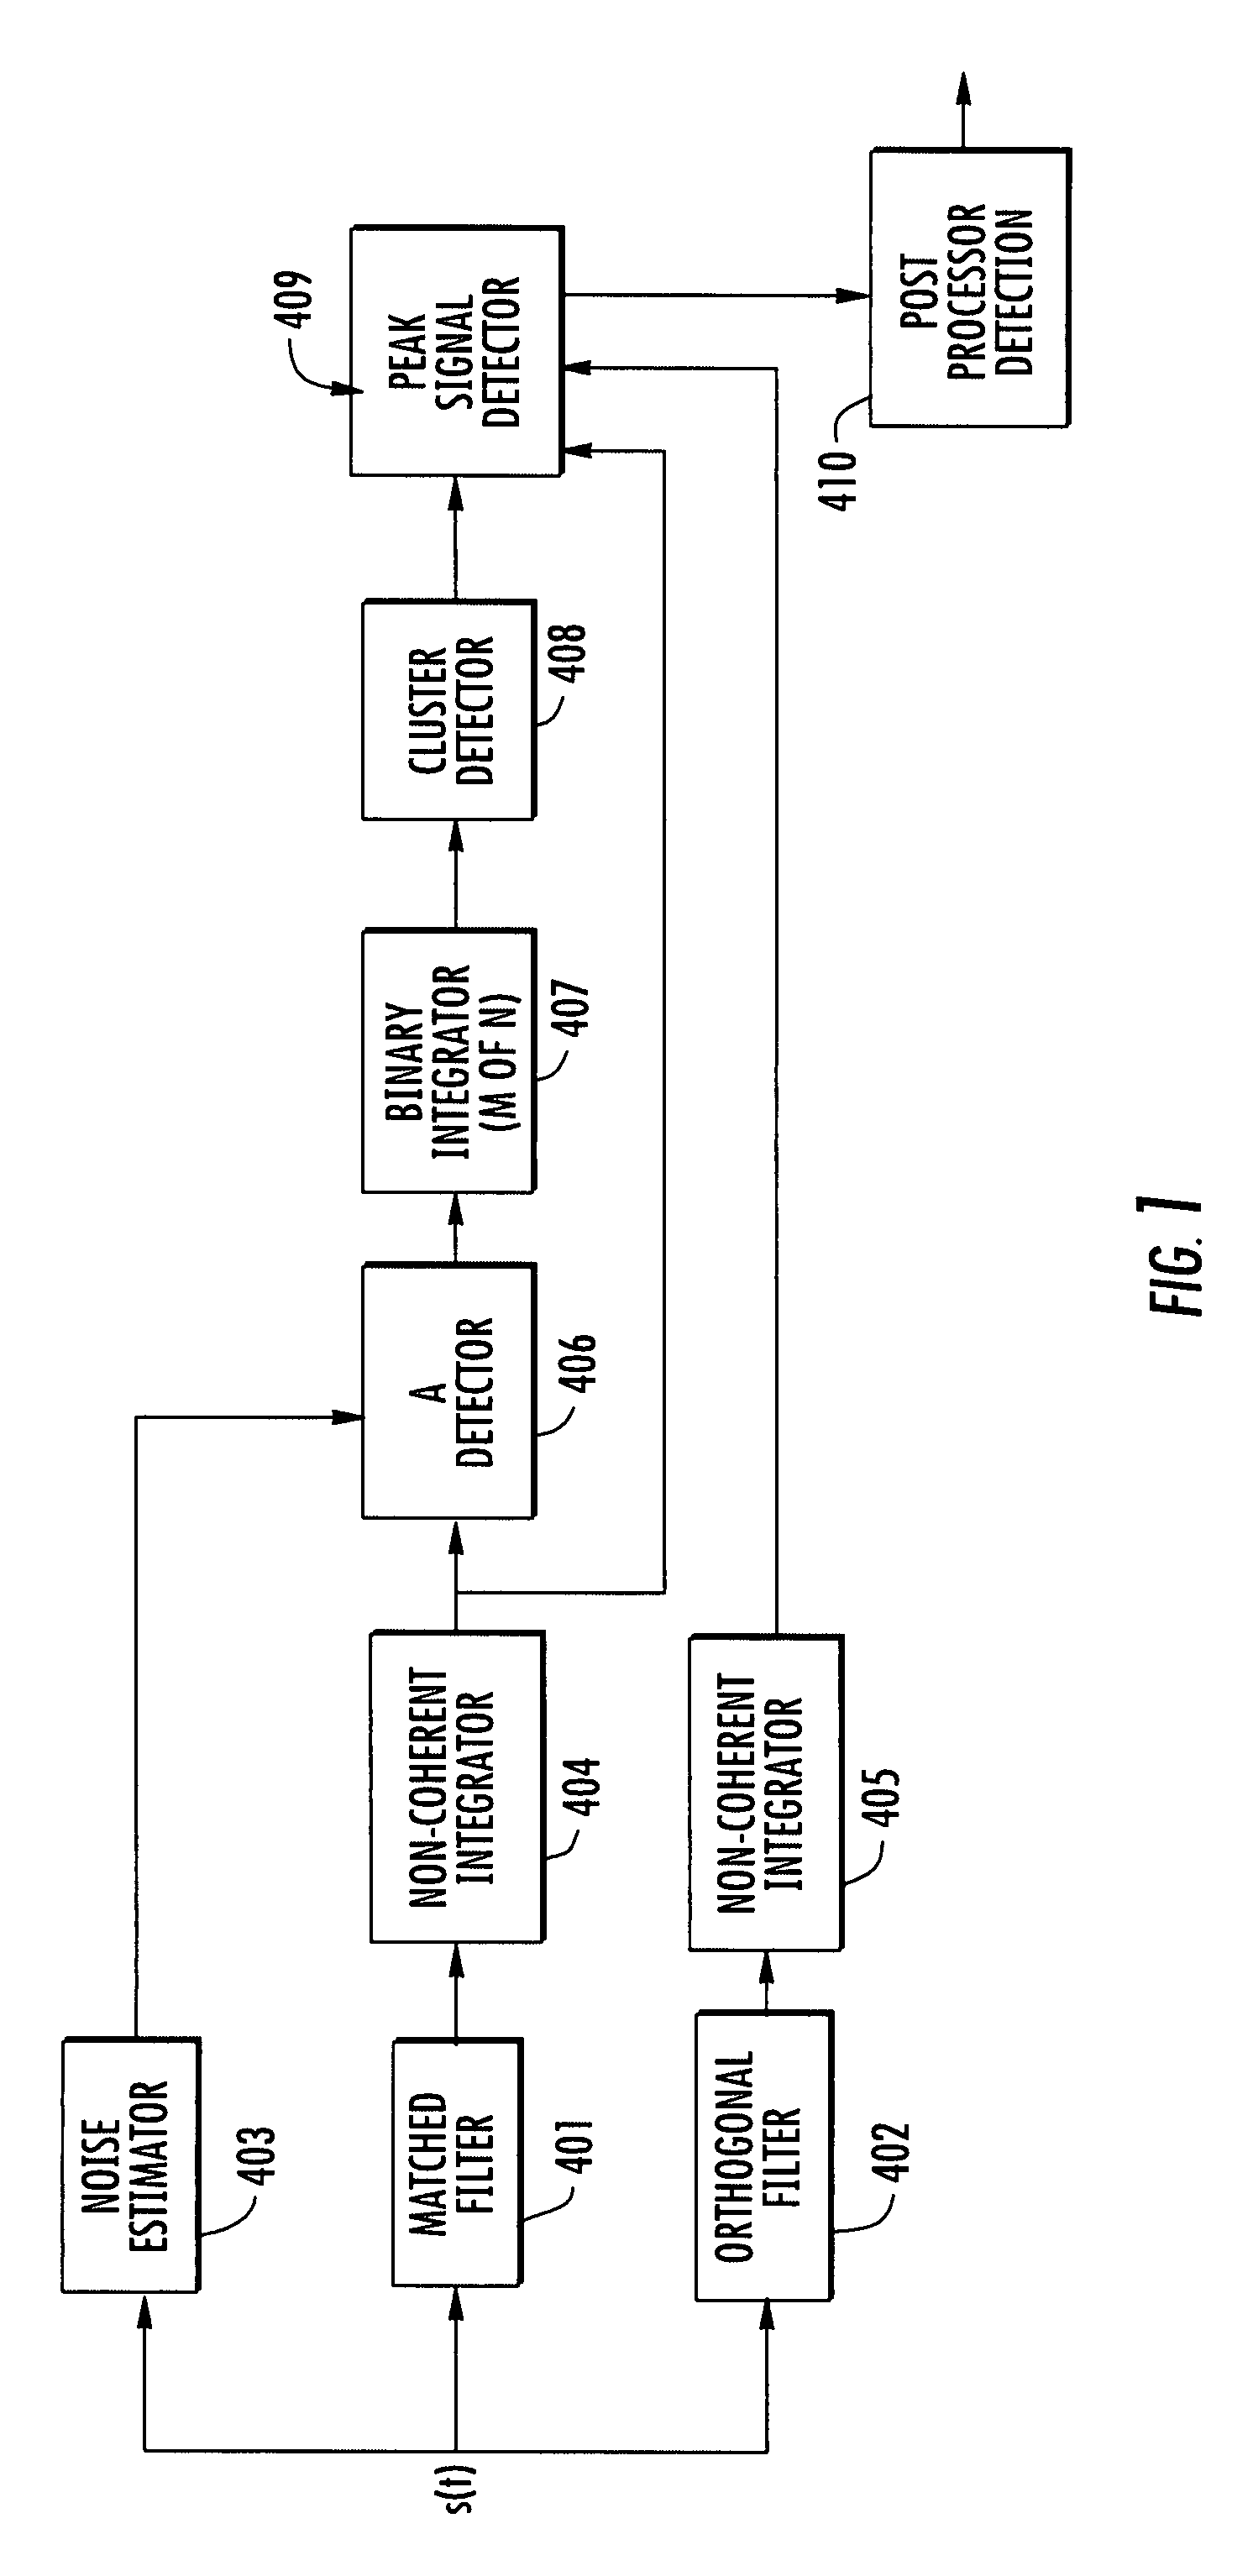 System and method for automated link quality measurement for adaptive modulation systems using noise level estimates